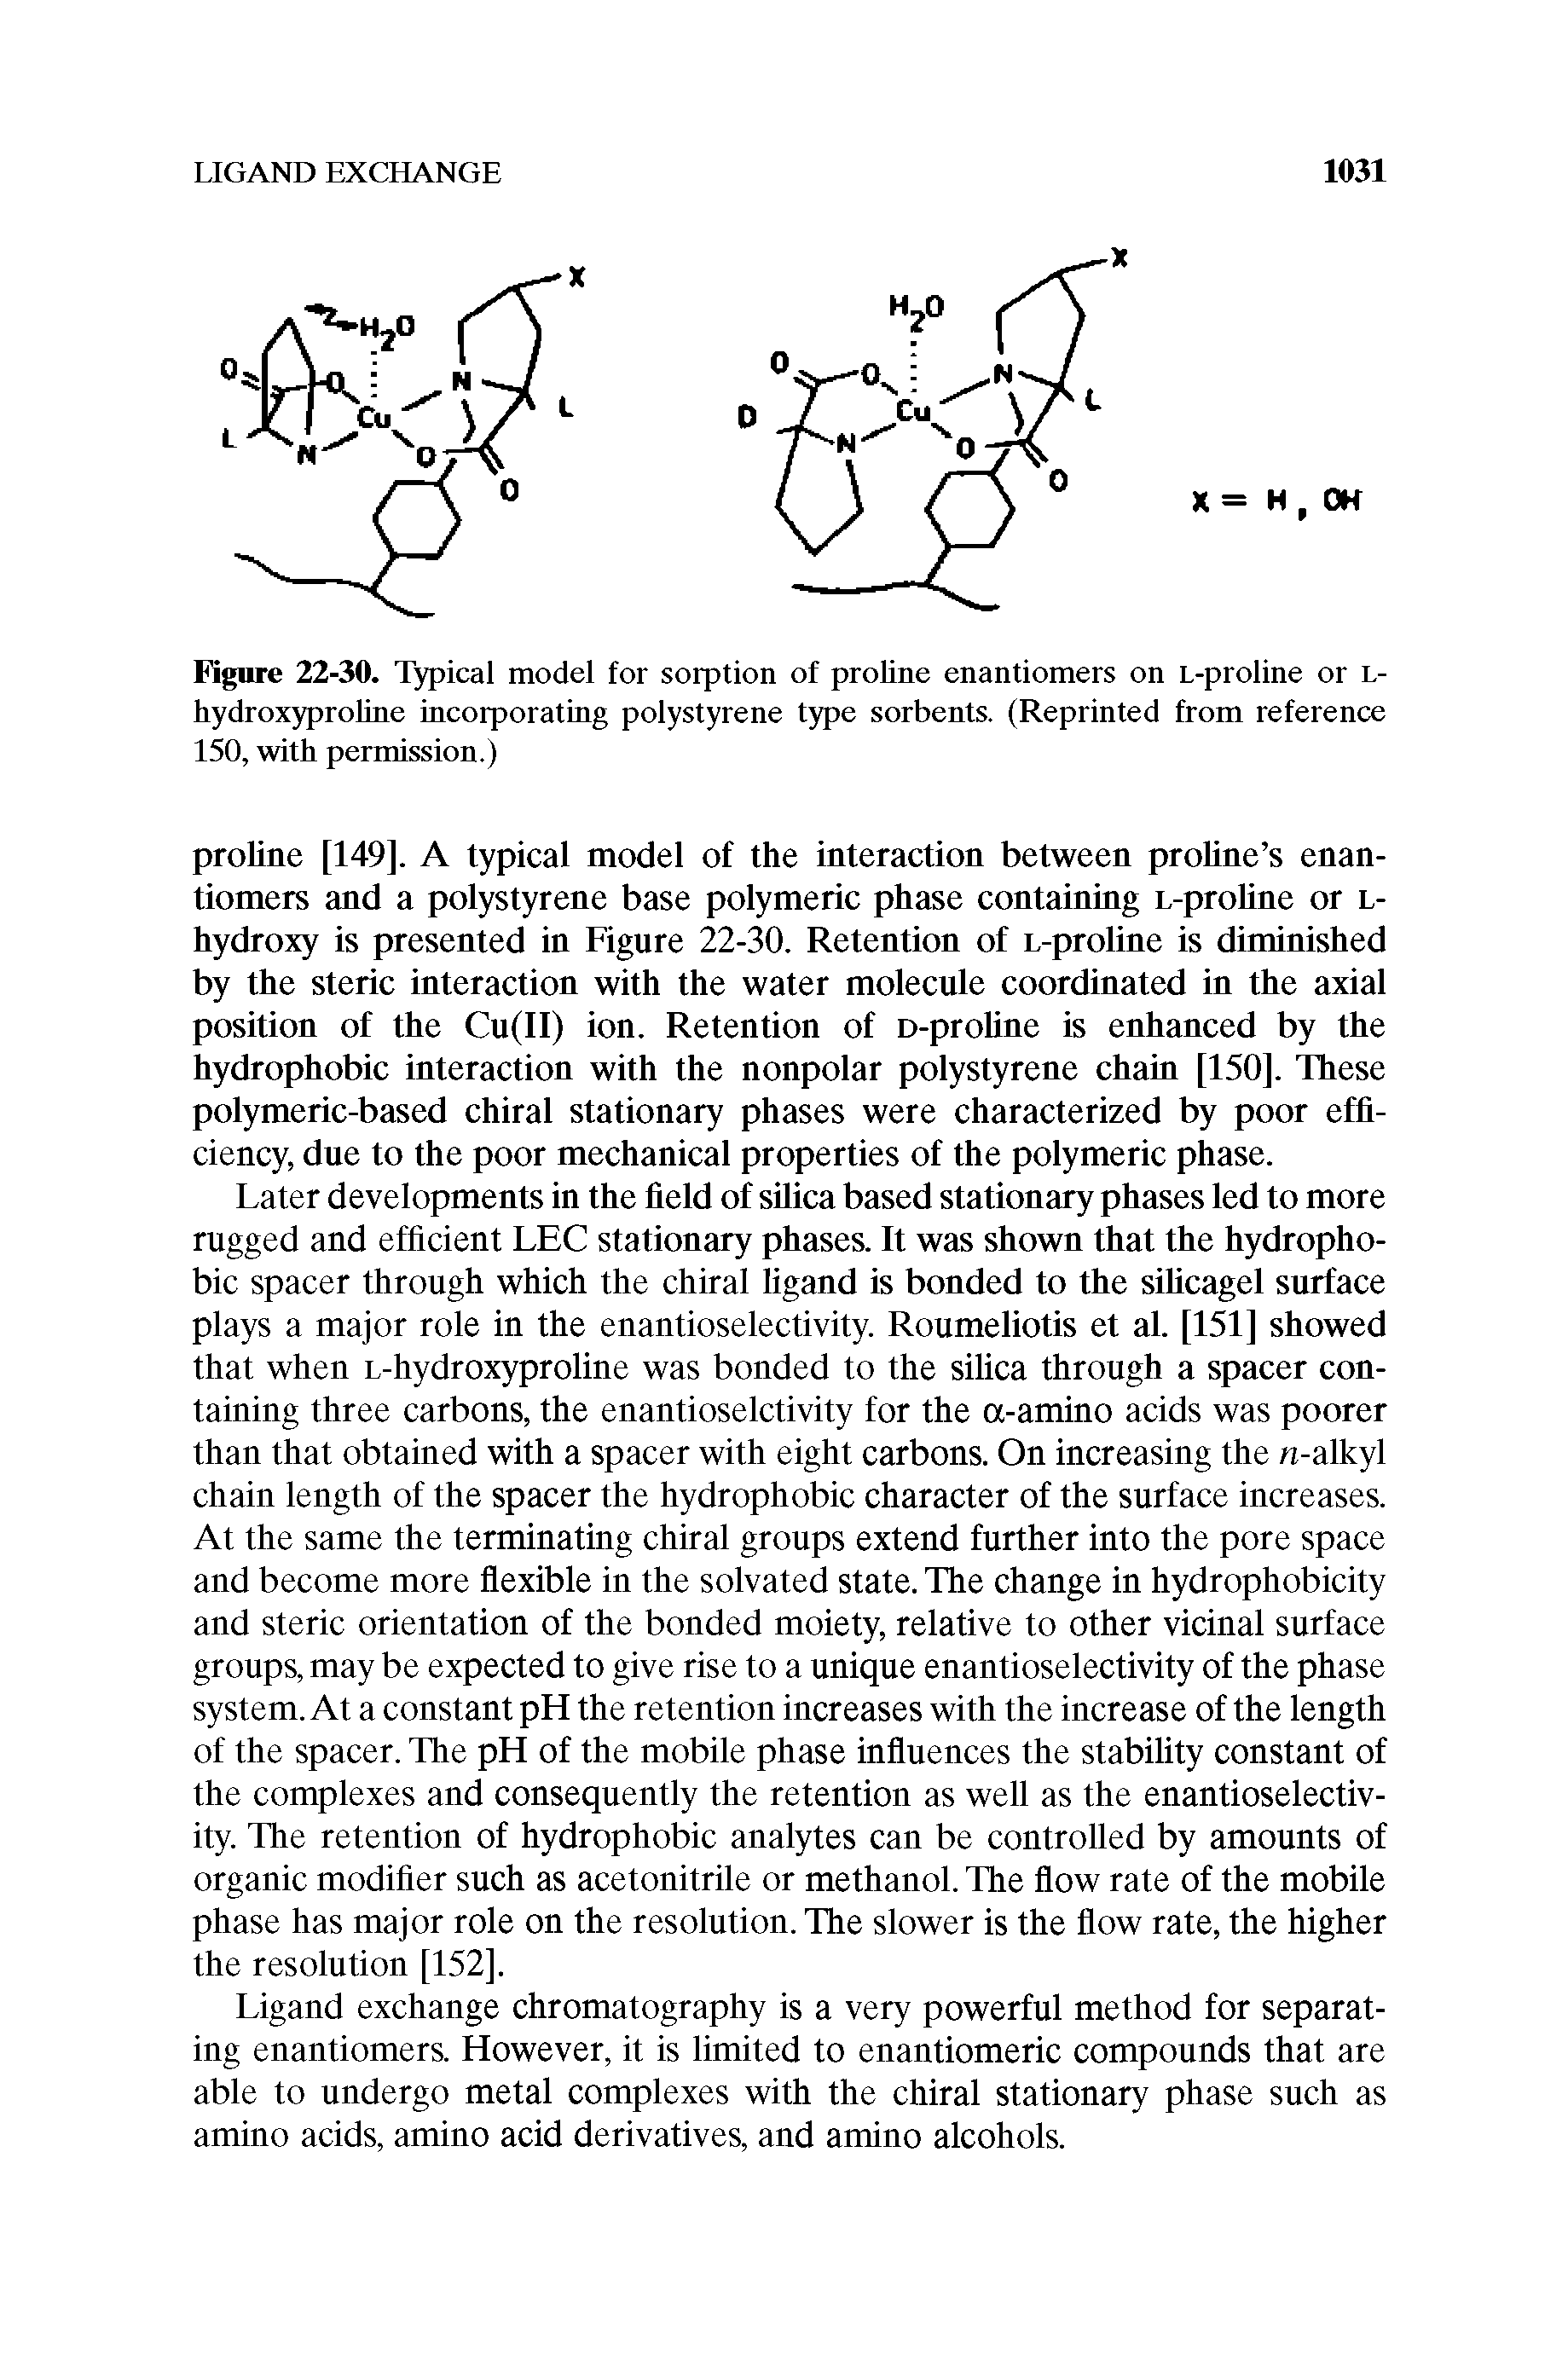 Figure 22-30. Typical model for sorption of proUne enantiomers on L-proline or l-hydroxyproUne incorporating polystyrene type sorbents. (Reprinted from reference 150, with permission.)...